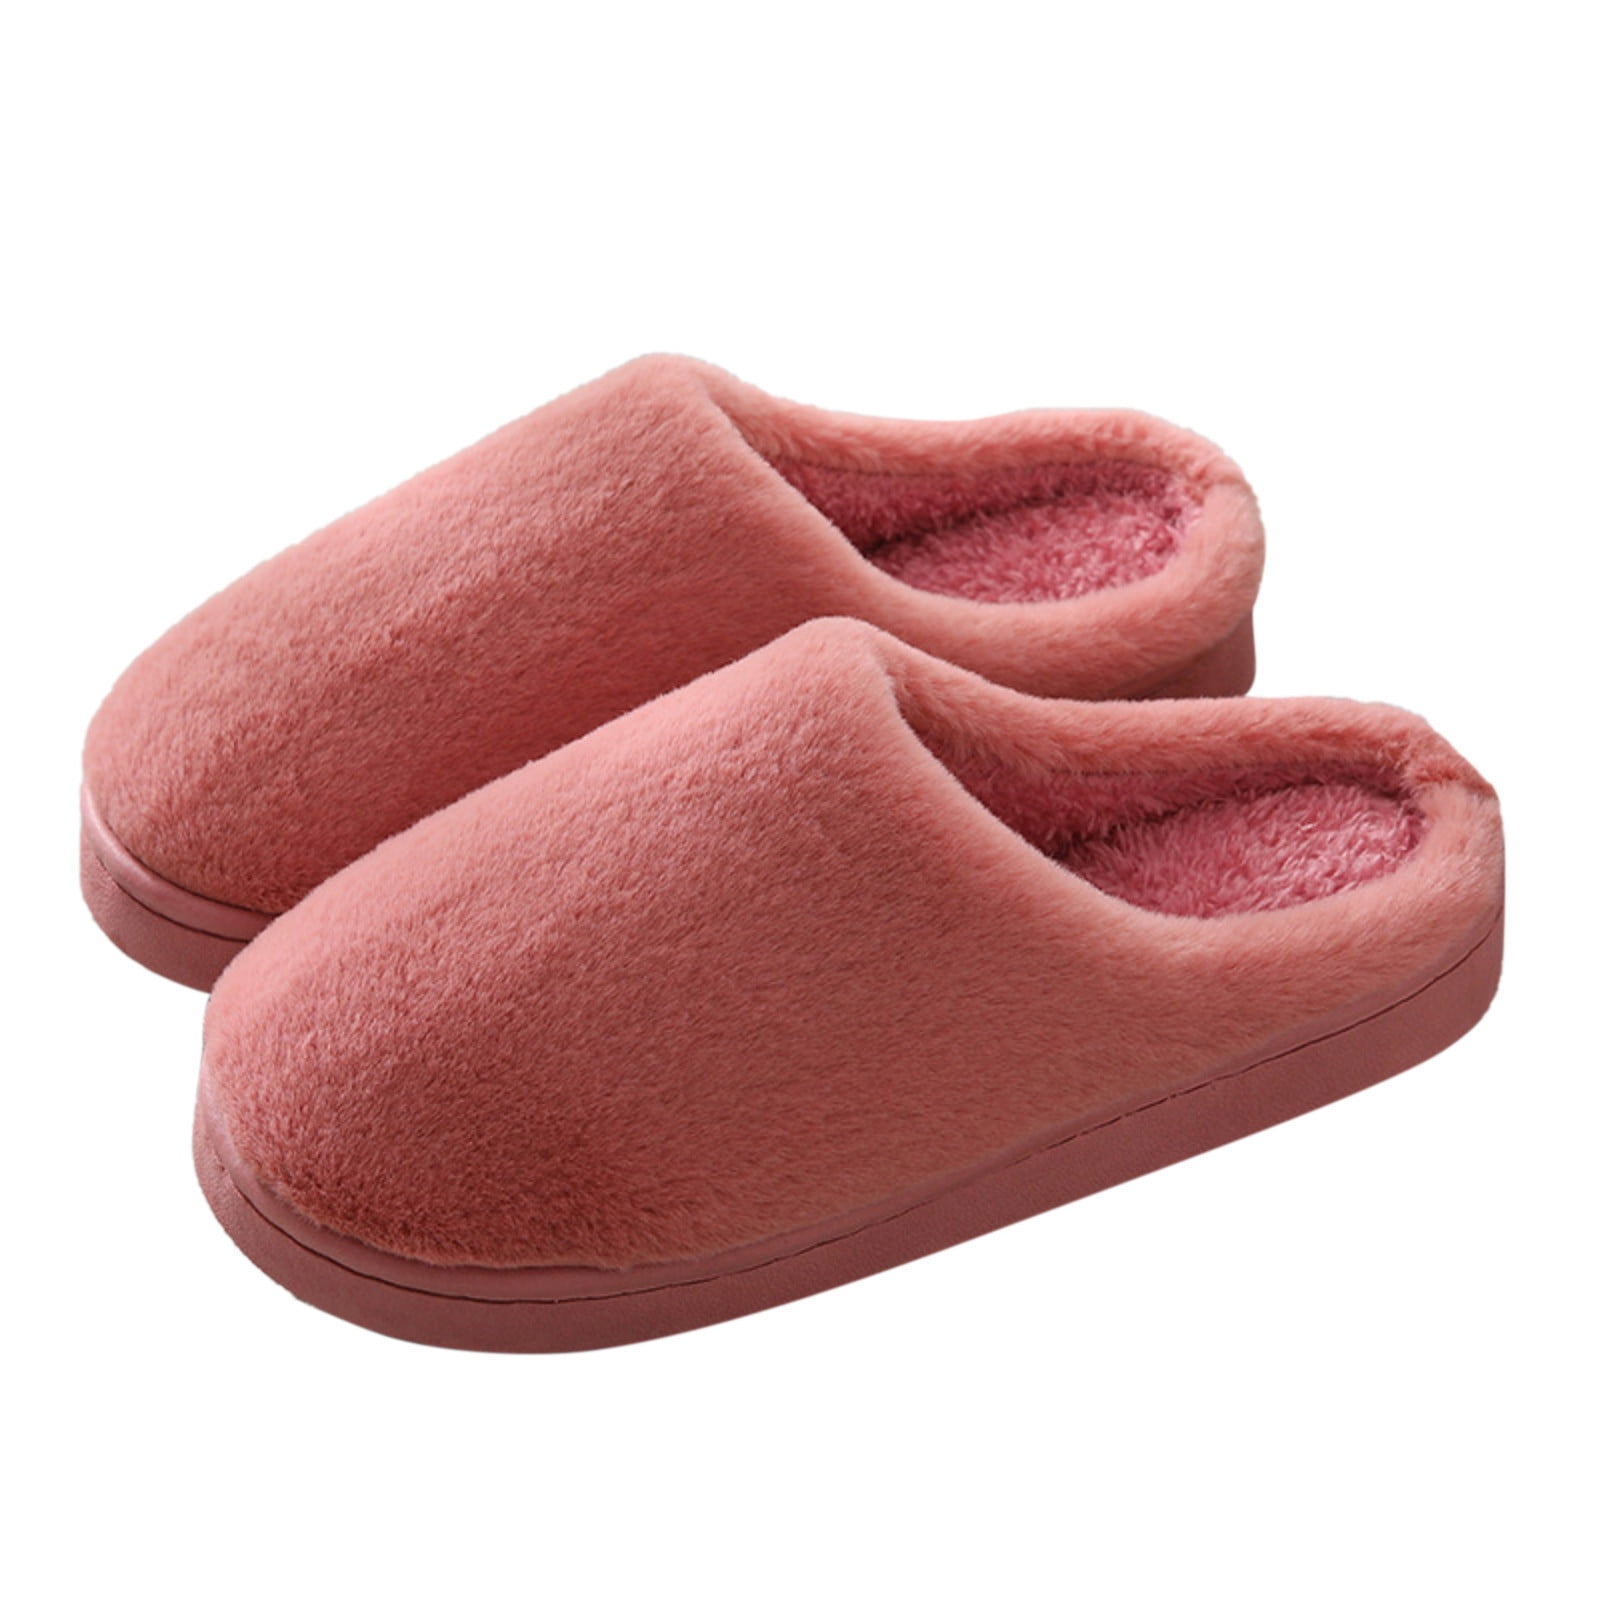 Accessorize Slippers for Women for sale | eBay